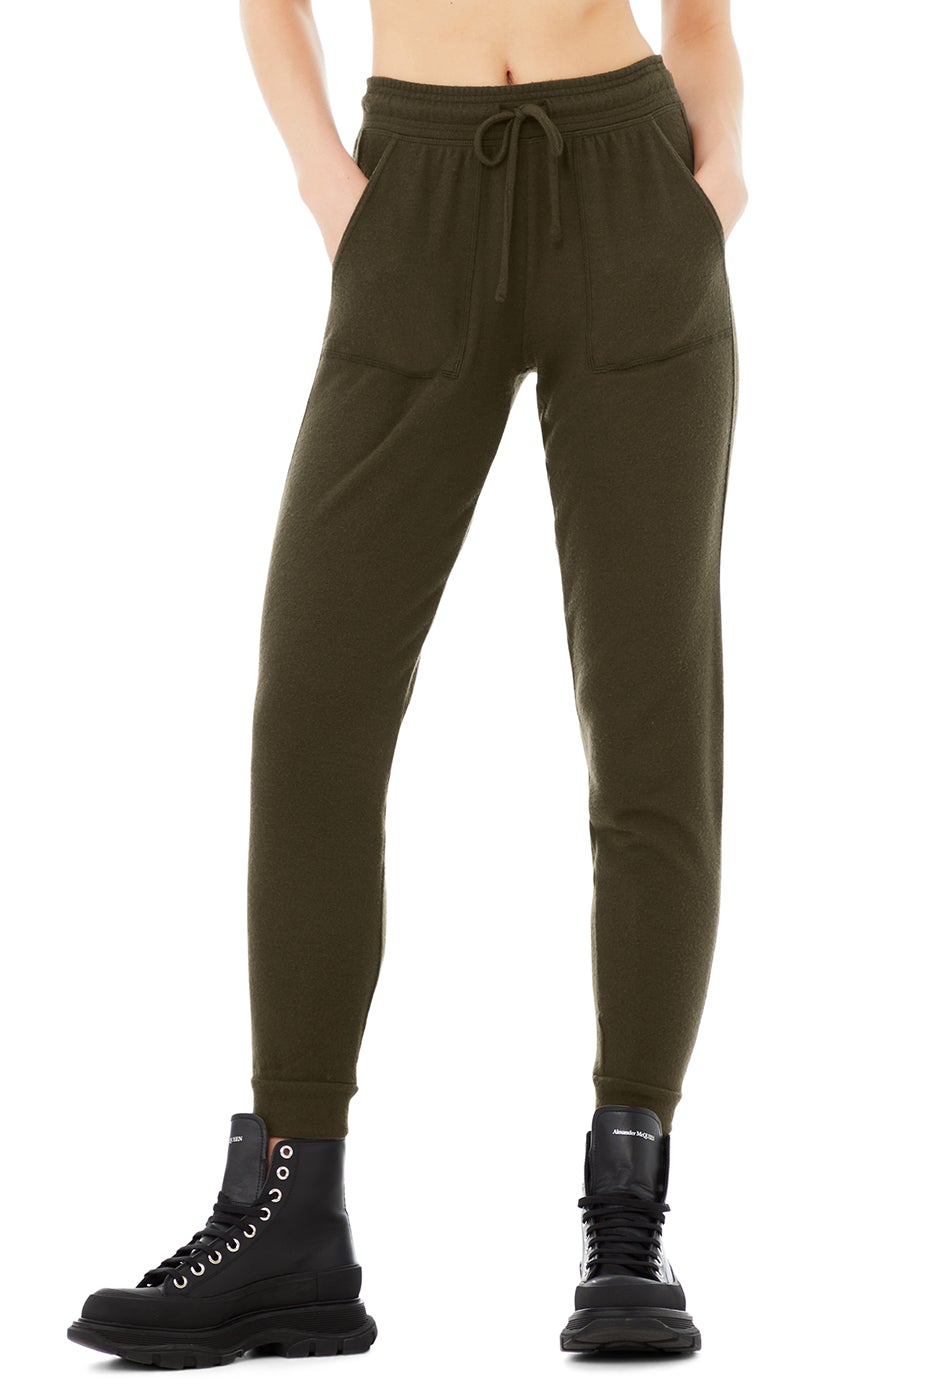 Alo Yoga Muse Sweatpant Limited: Midnight Green Small NWT